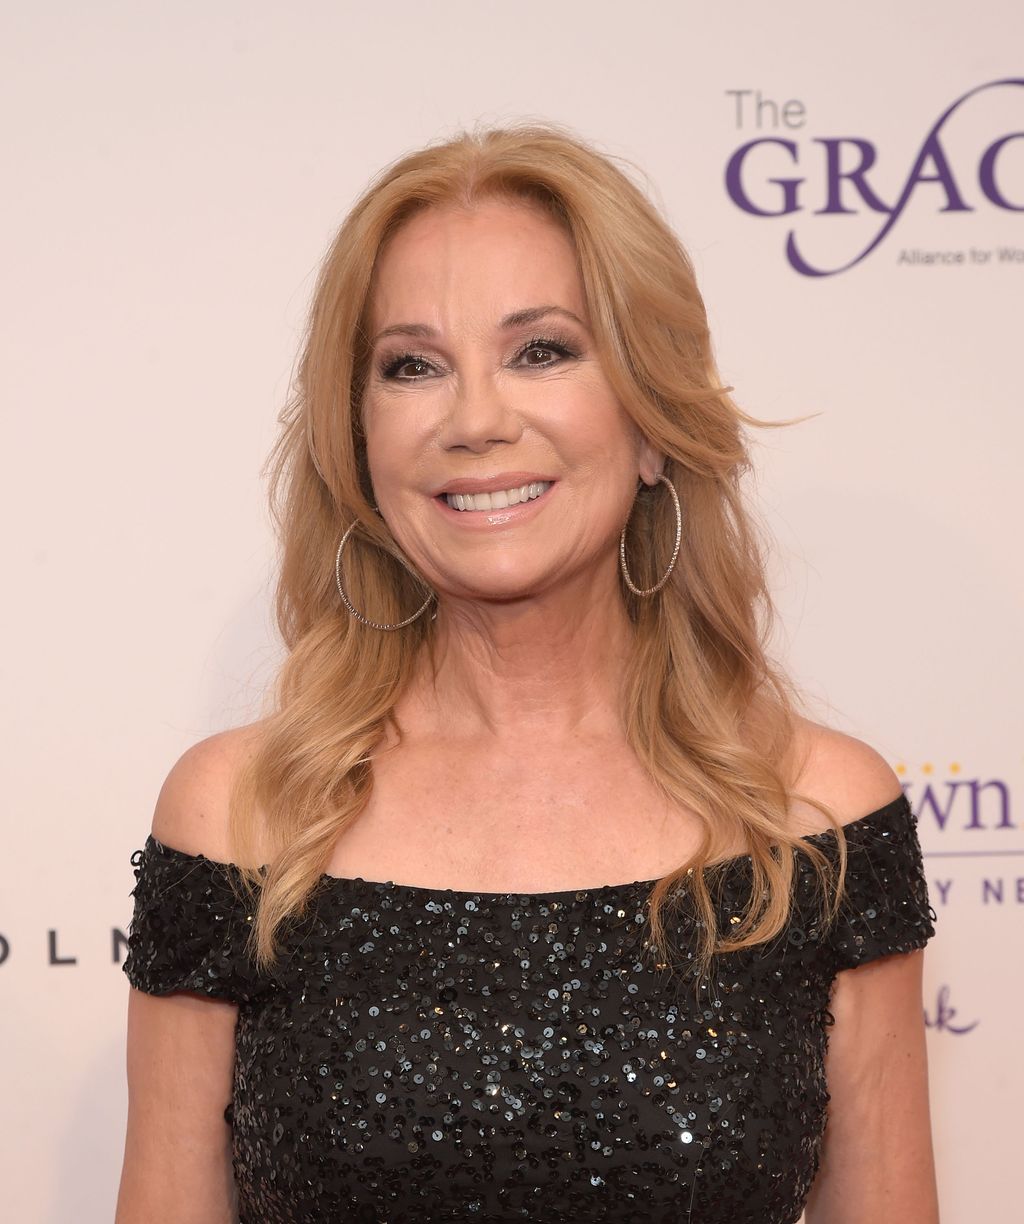 Kathie Lee Gifford attends the 41st Annual Gracie Awards Gala at the Beverly Wilshire Four Seasons Hotel on May 24, 2016 | Photo: GettyImages